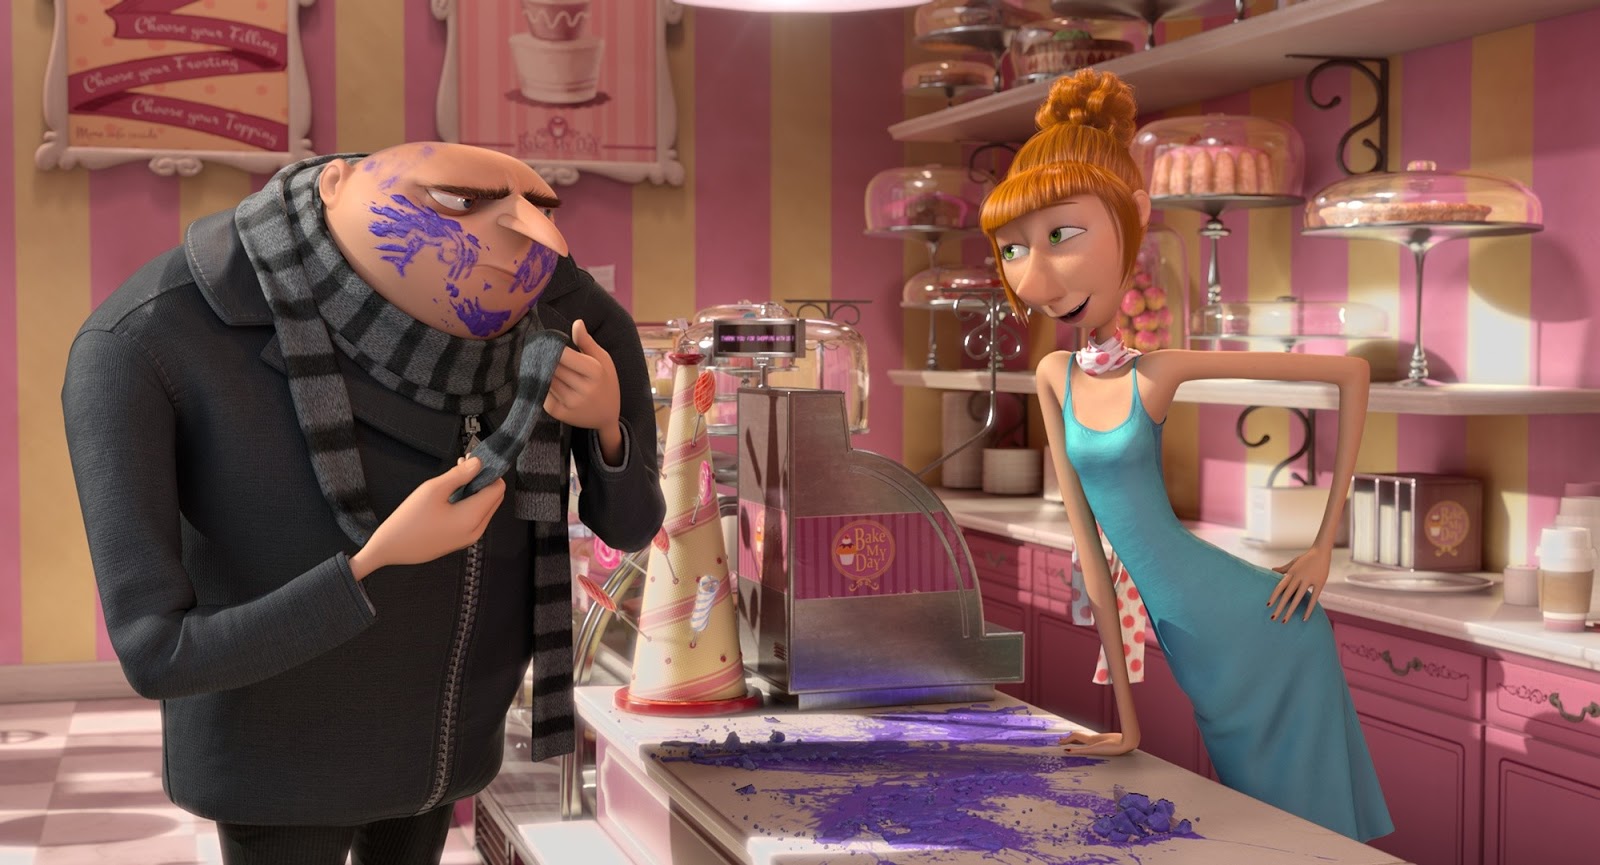 Gru (voiced by Steve Carell) gets a romance with Agent Lucy Wilde (voiced by Kristen Wiig) in Despicable Me 2 (2013)